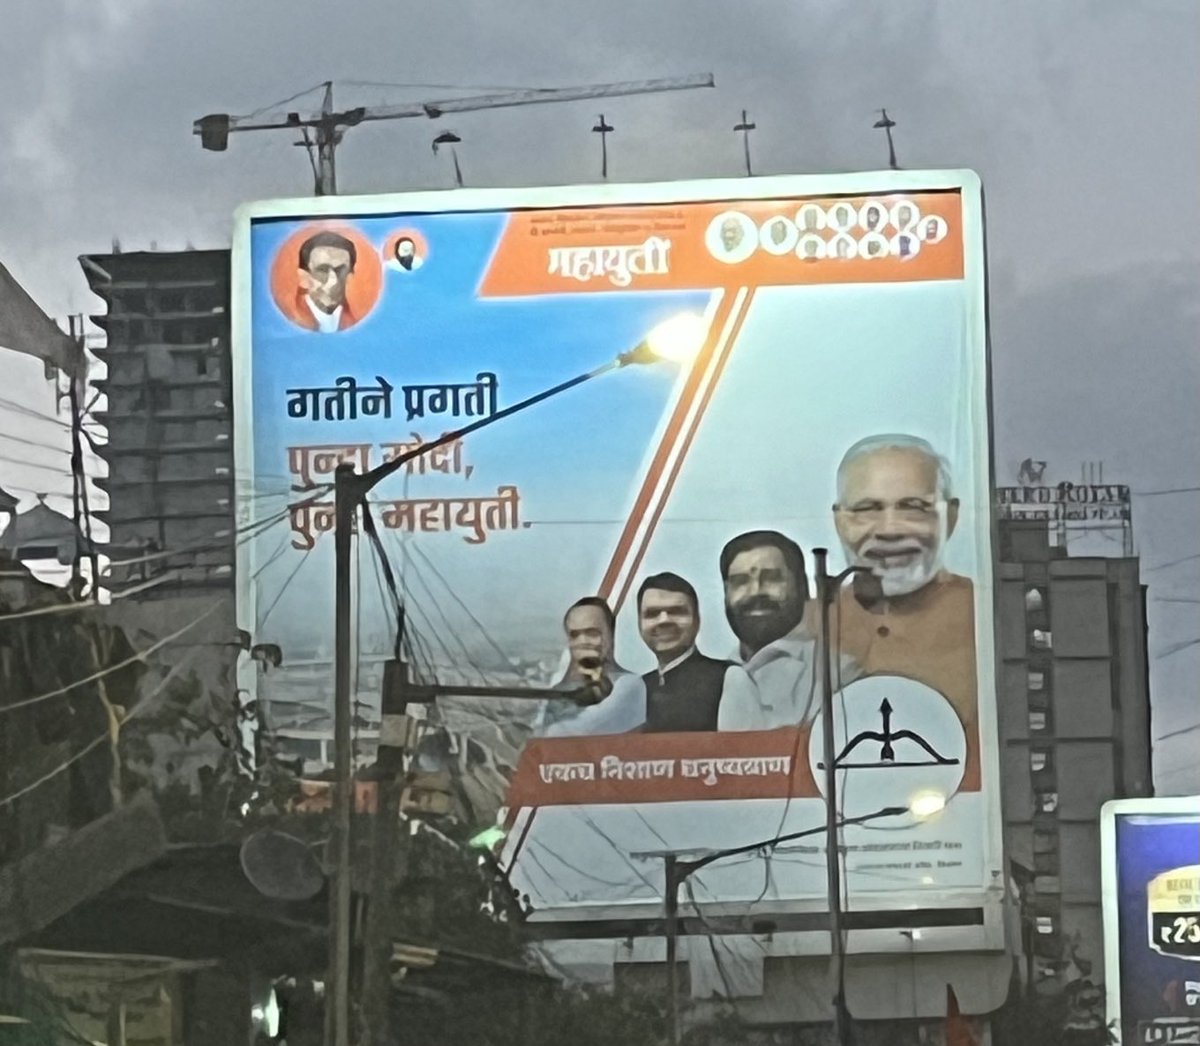 Interesting that they have Modi larger than Balasaheb Thackeray on this hoarding.